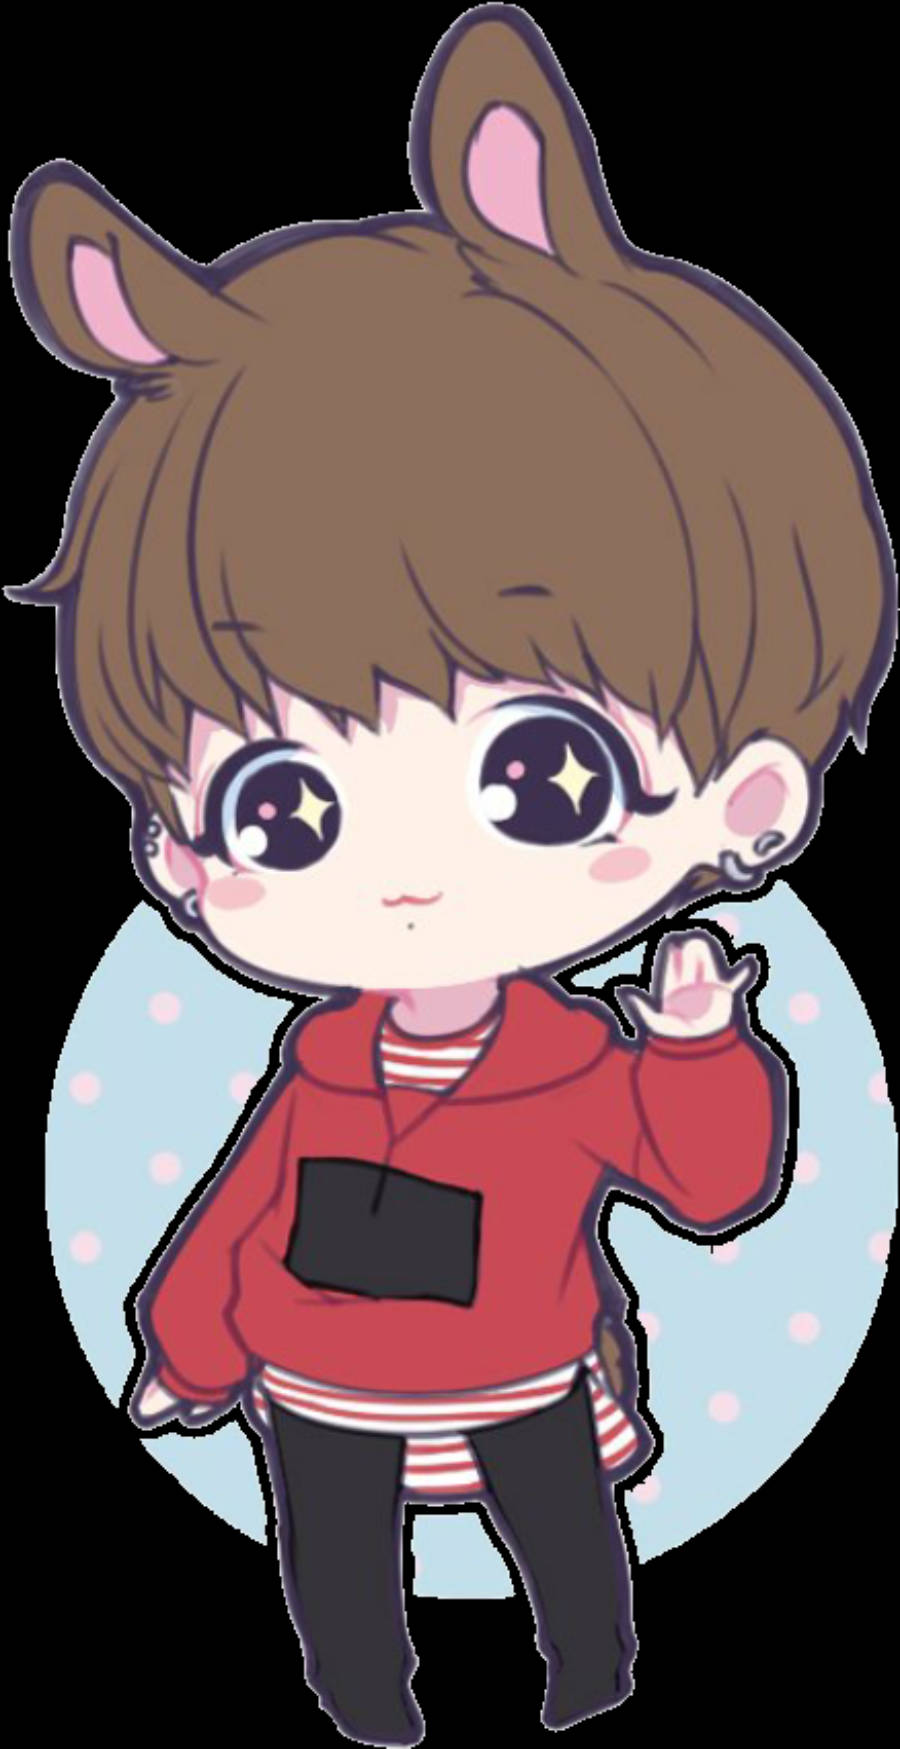 Transparent Anime Jungkook With Ears Background